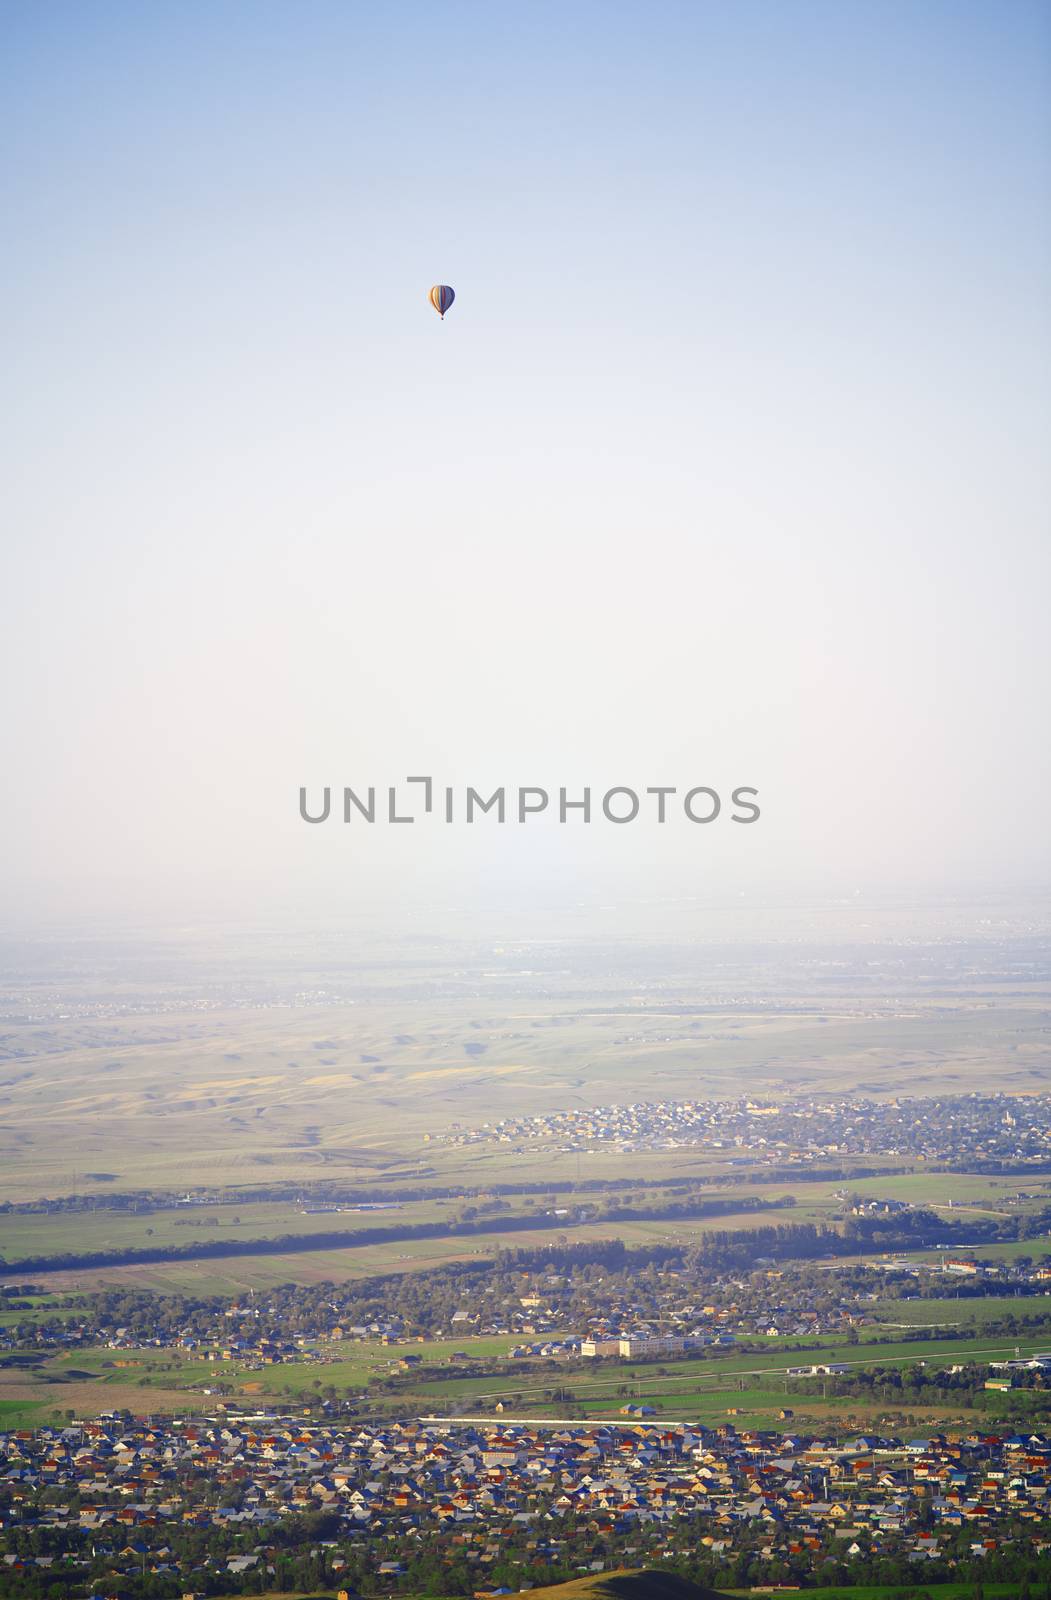 Hot air balloon above the green field and villages